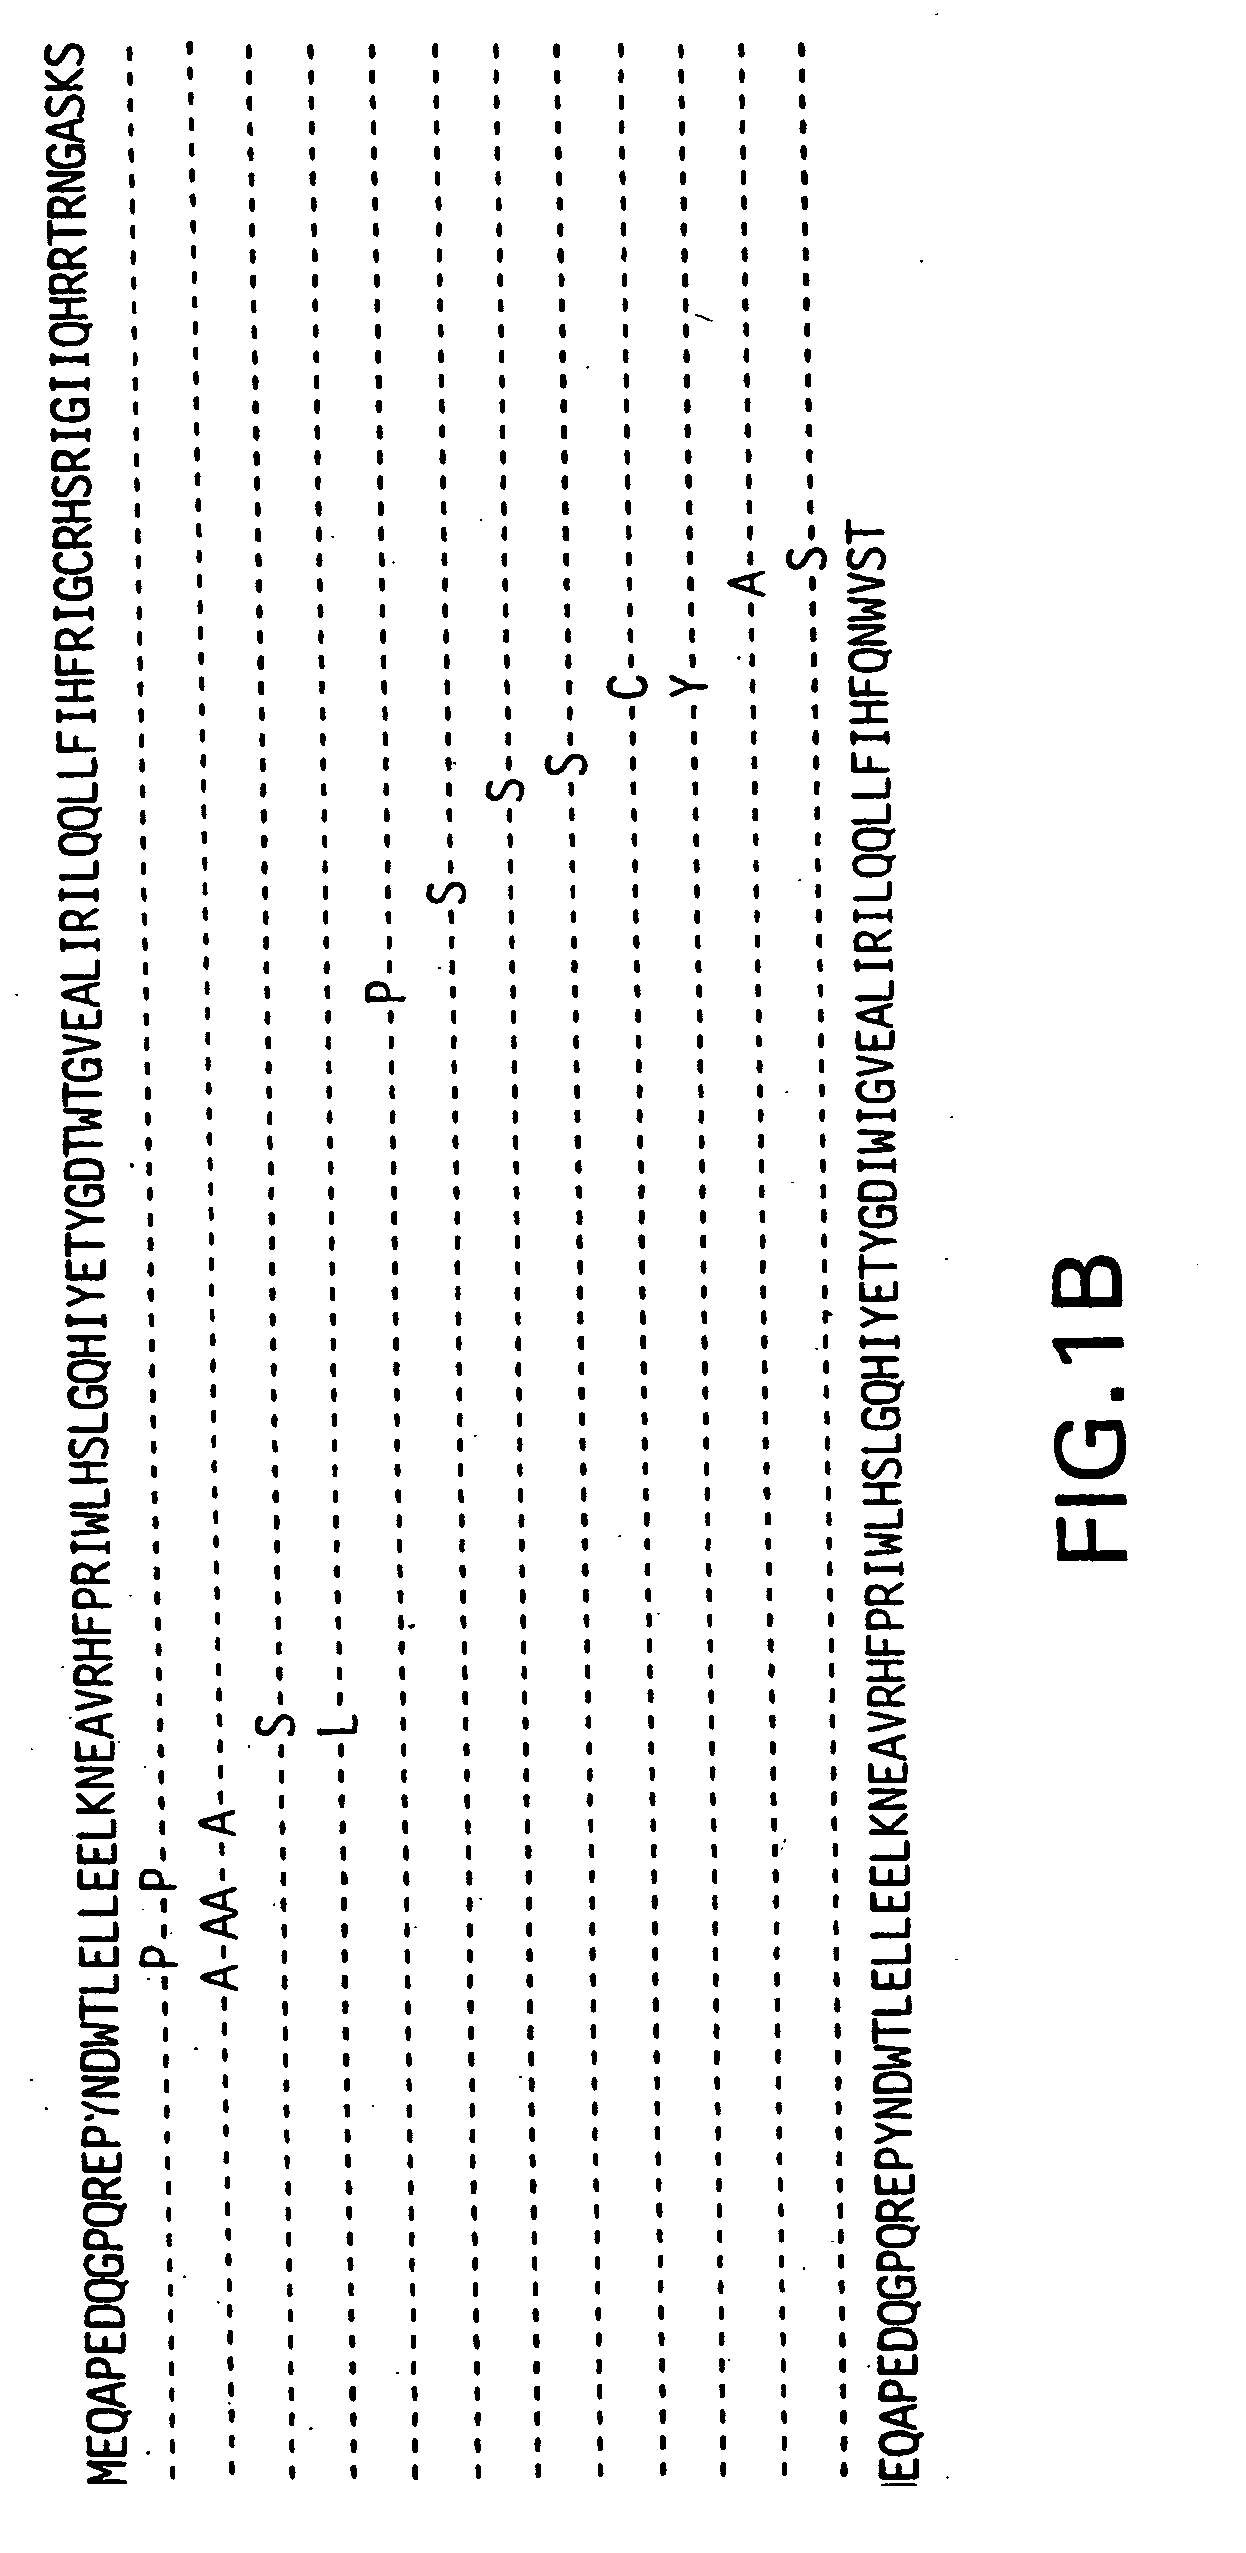 Functional fragments of HIV-1 VPR protein and methods of using the same